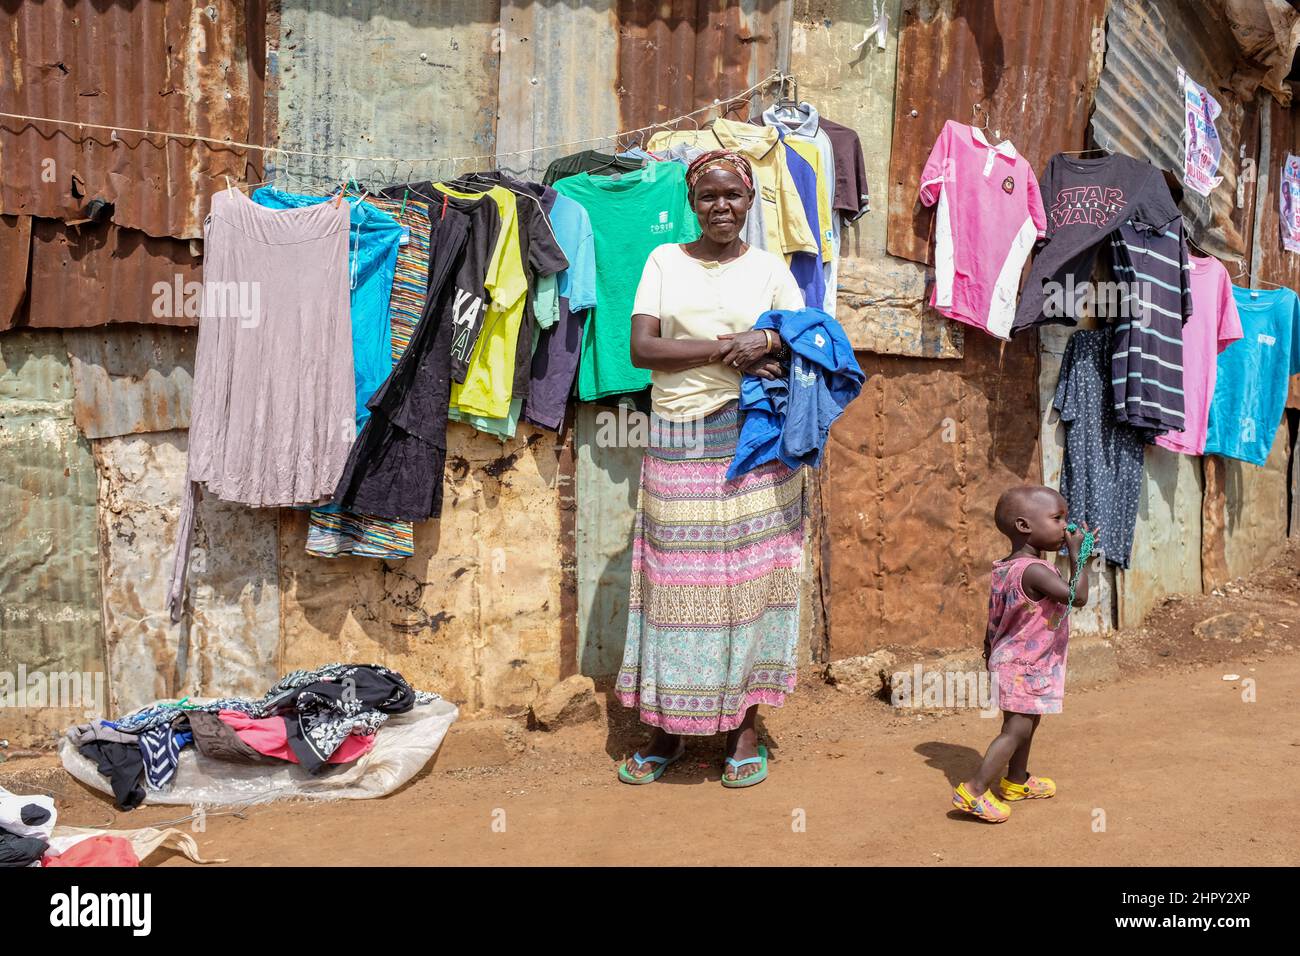 How second-hand clothing donations are creating a dilemma for Kenya, Kenya